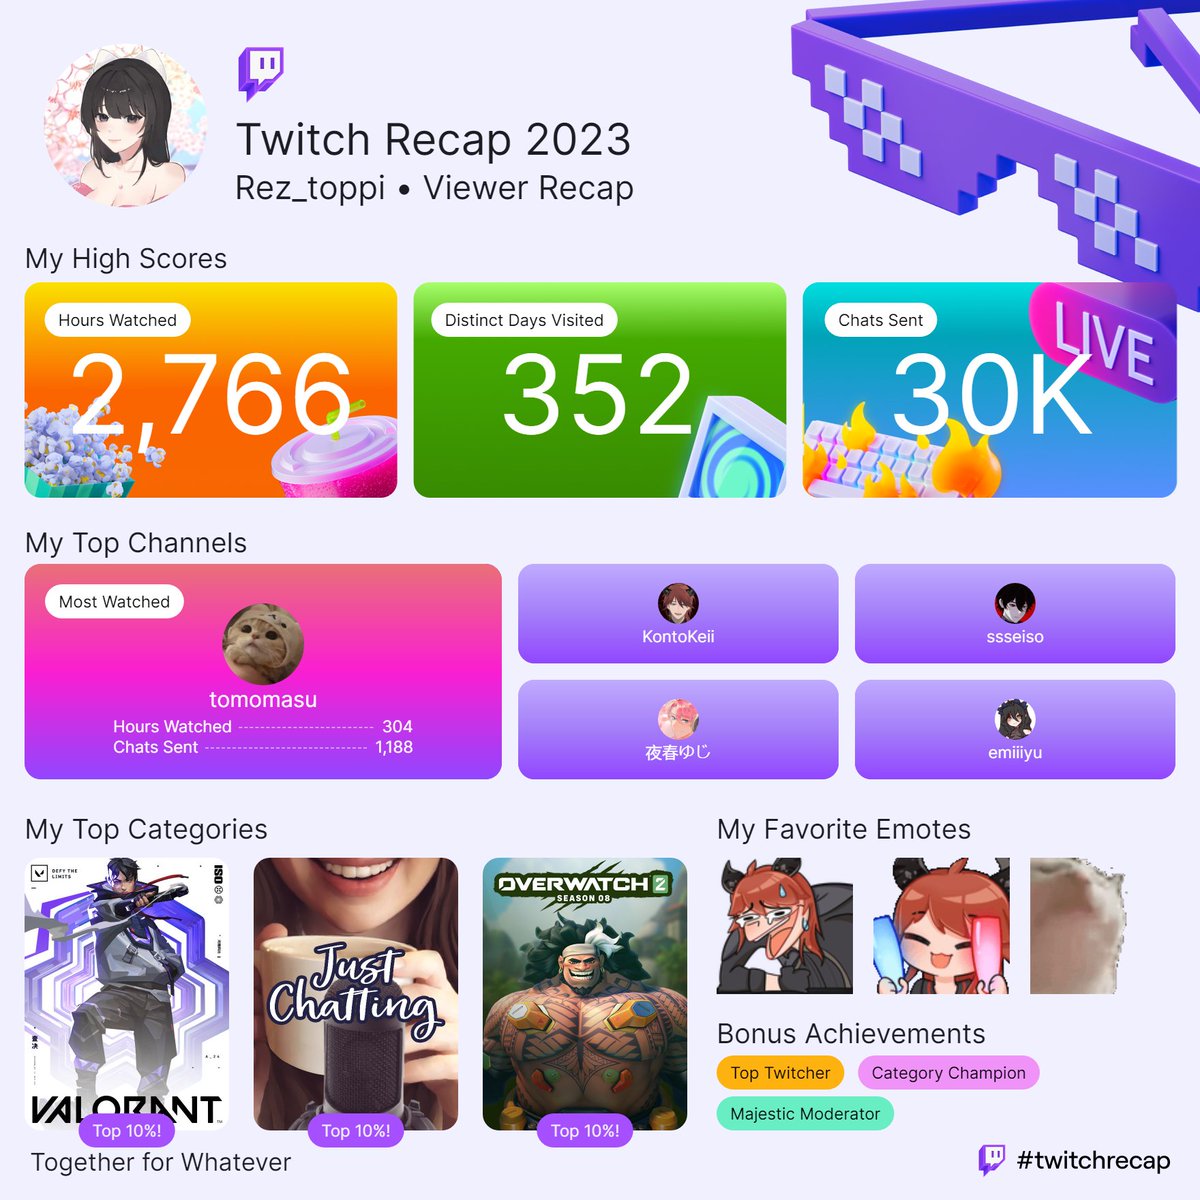 Here's my #TwitchRecap2023 ! Thank you all so much for a wonderful year of streaming, I hope to bring more and have lots of fun for 2024🩷✨️ This year is truly a memorable one for me, grateful to have an amazing community!

As a viewer, I can say that I'm a big tomomasu fan :3